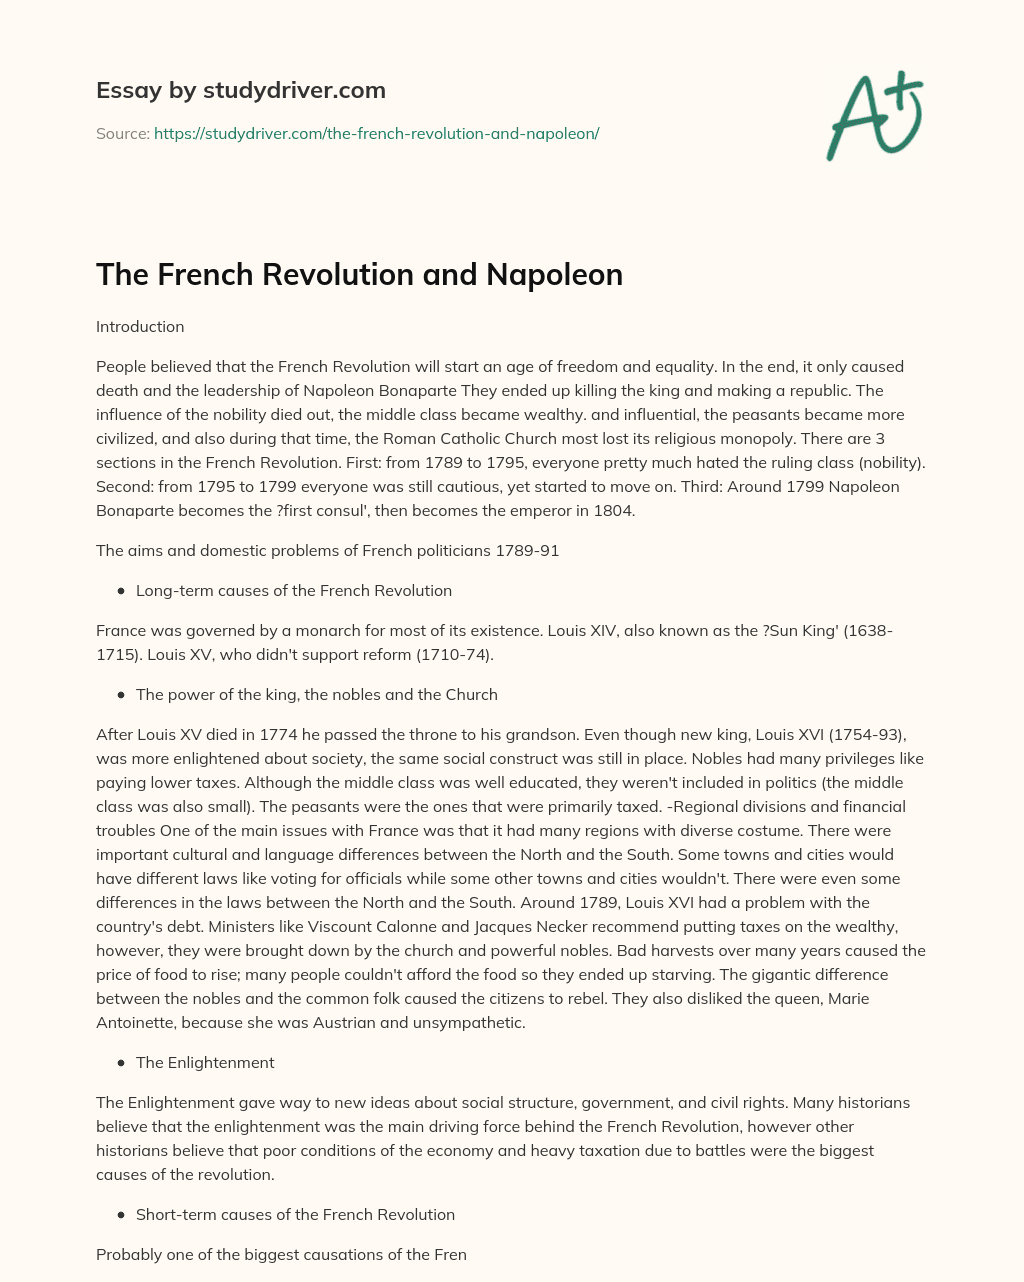 The French Revolution and Napoleon essay